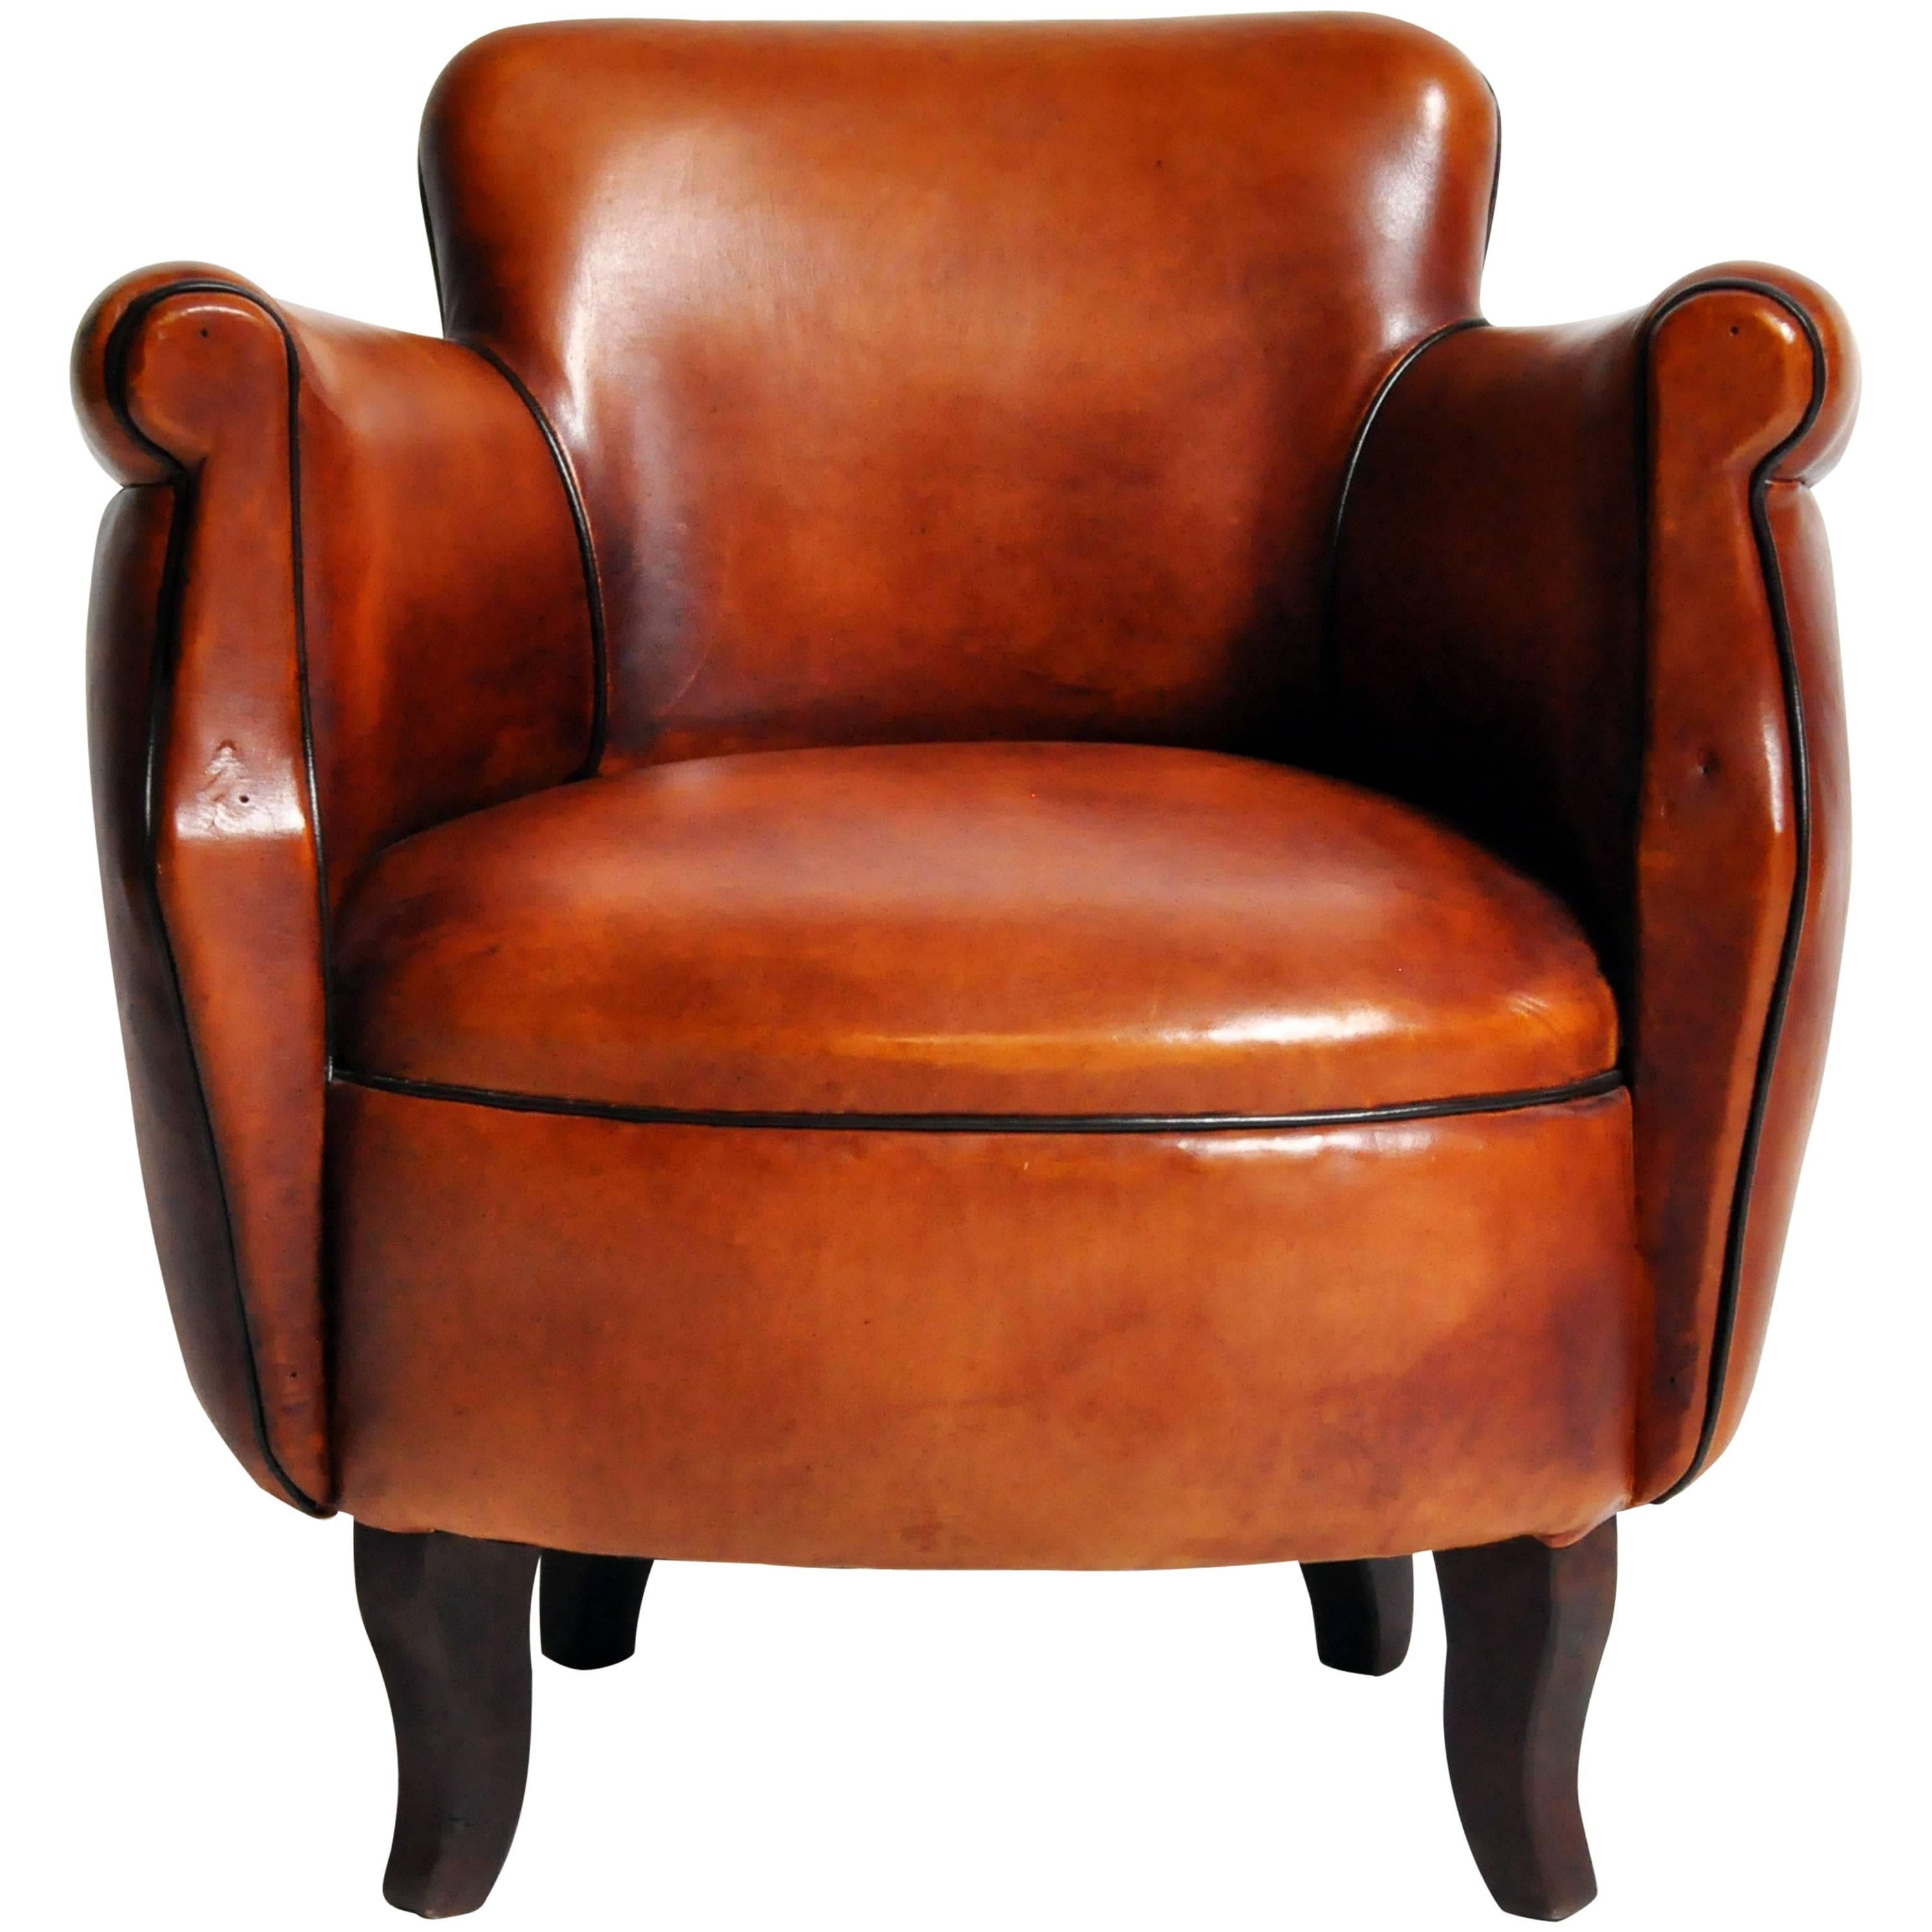 Parisian Tulip Leather Club Chair with Dark Piping